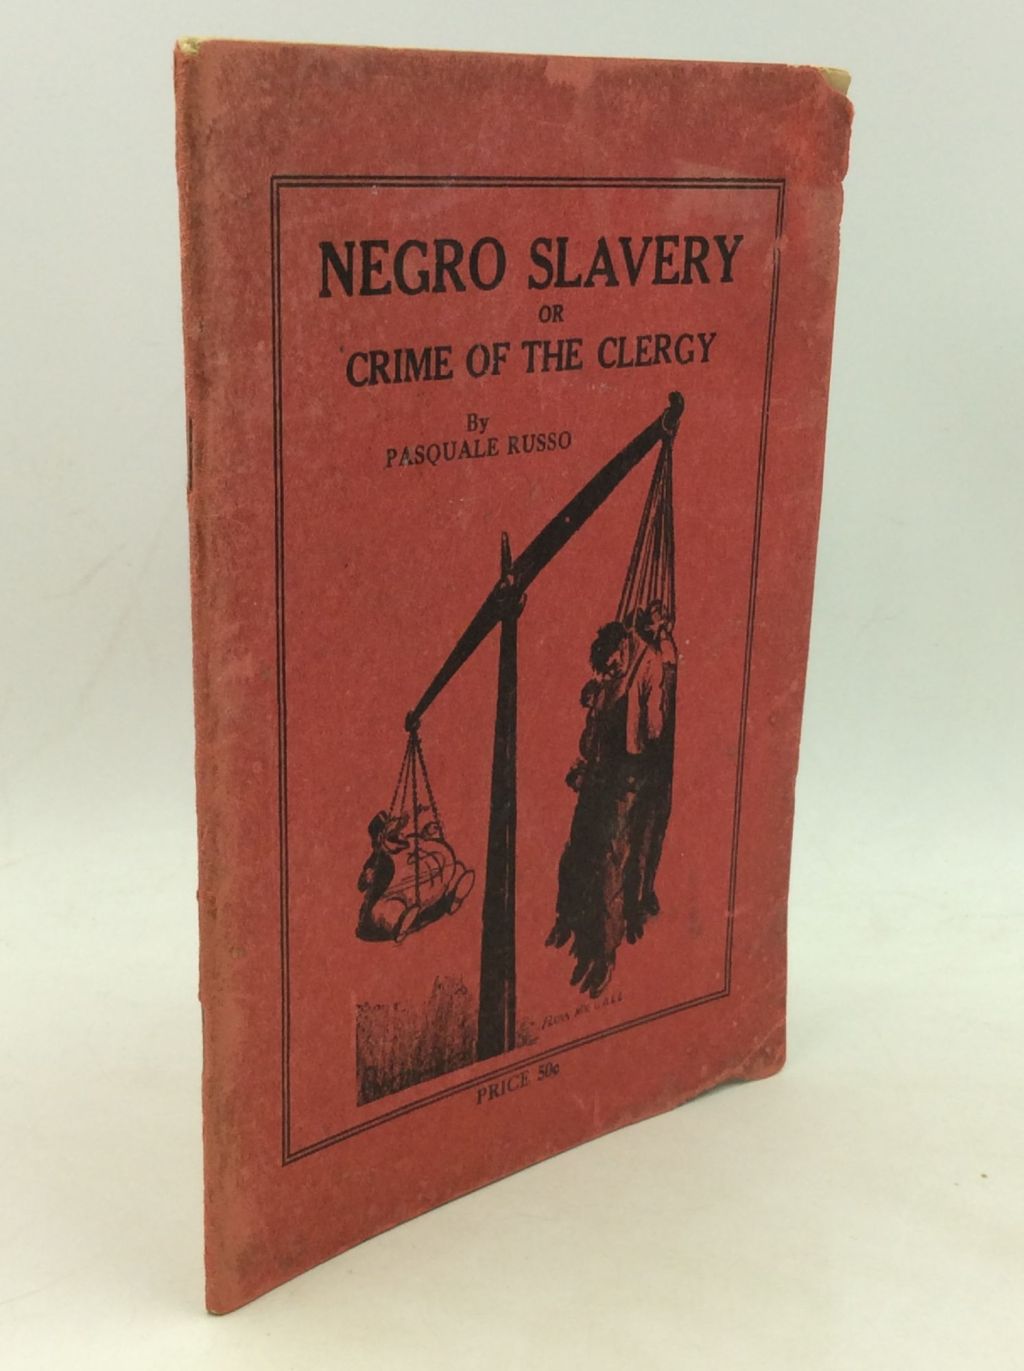 (1923)”Negro Slavery or Crime of the Clergy” review by Samuel Ball